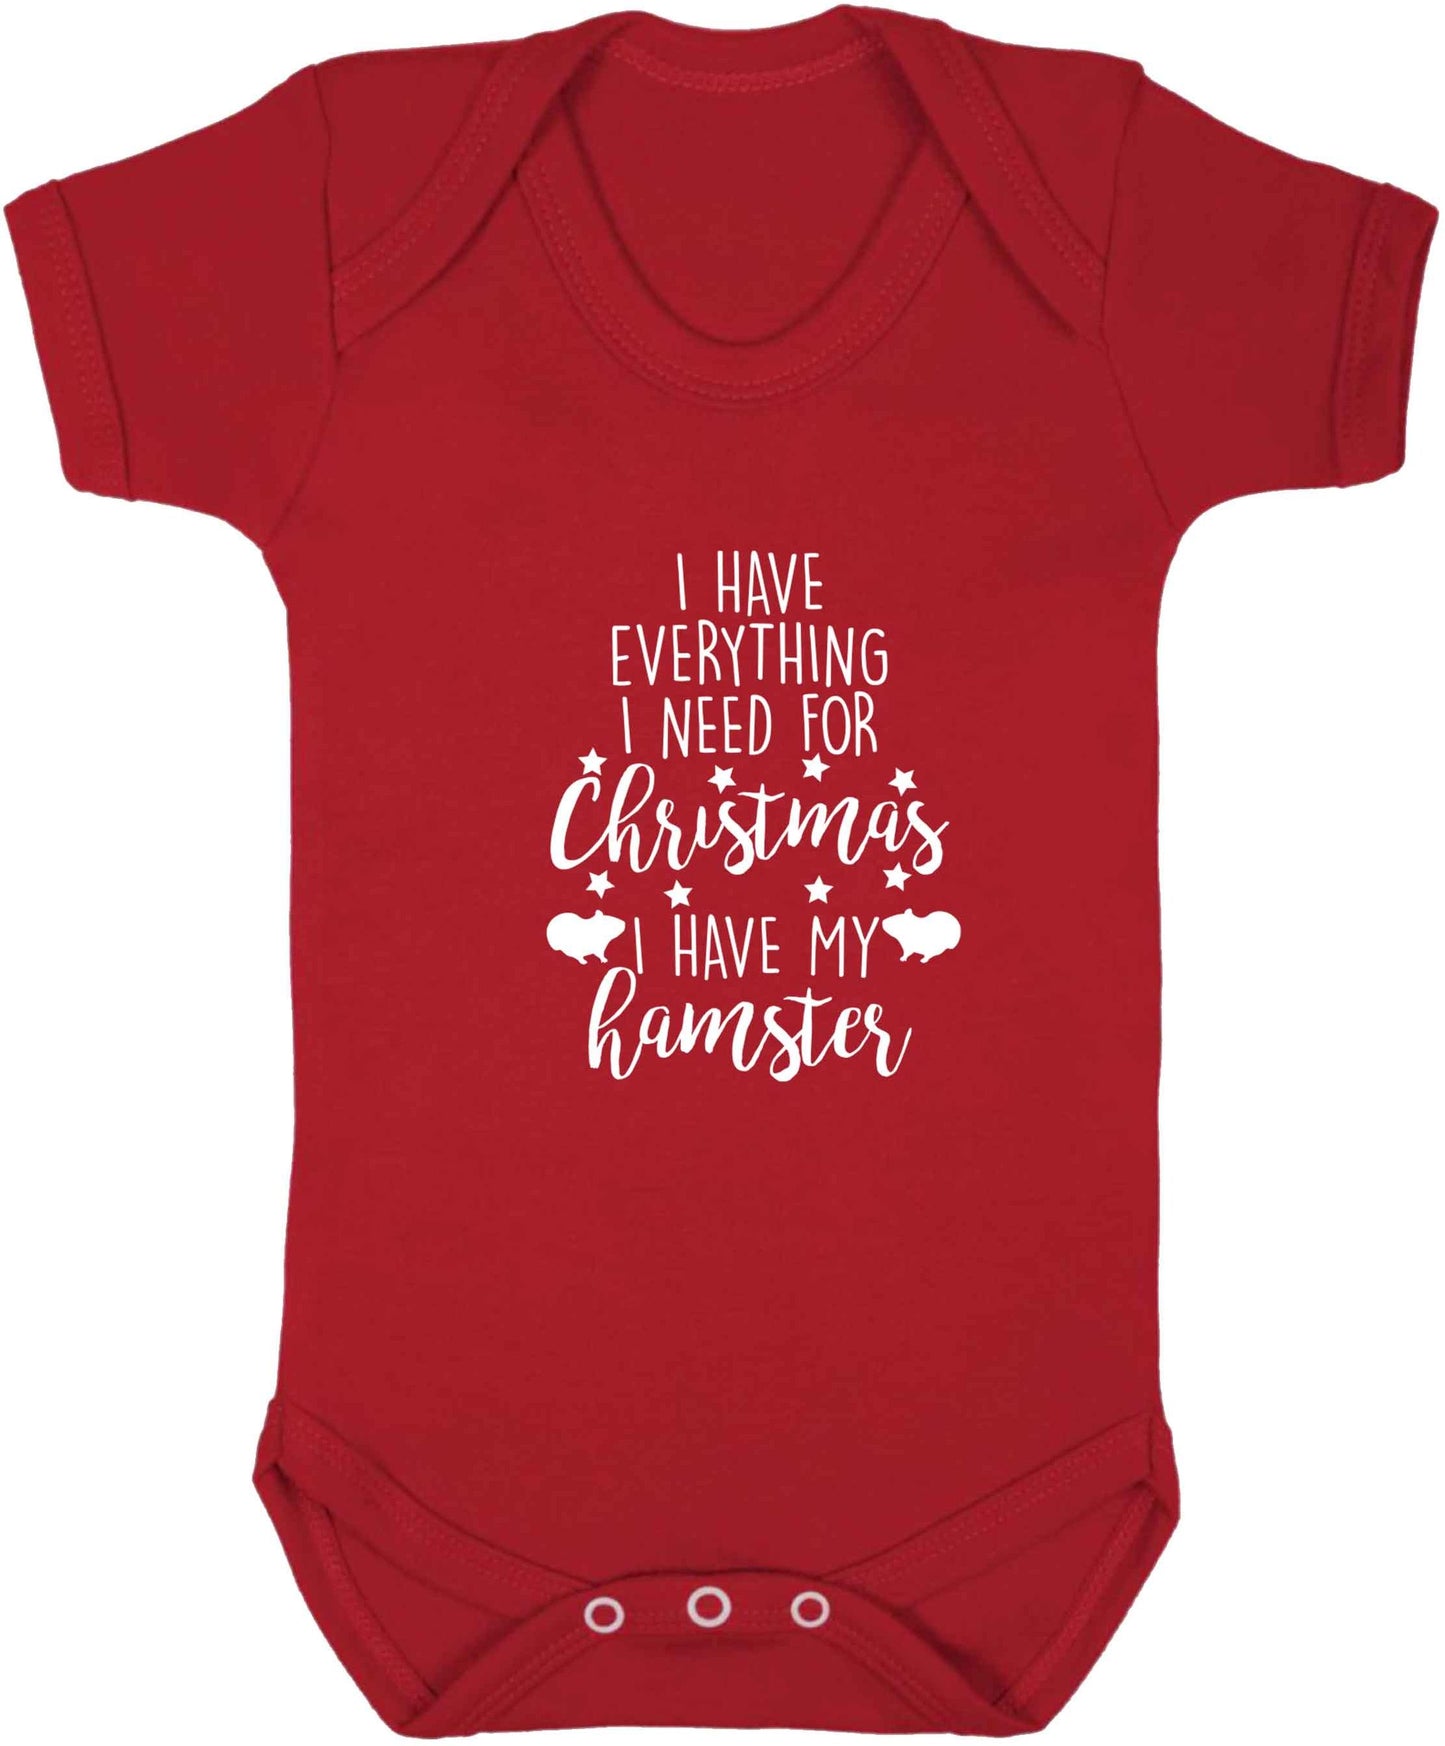 I have everything I need for Christmas I have my hamster baby vest red 18-24 months